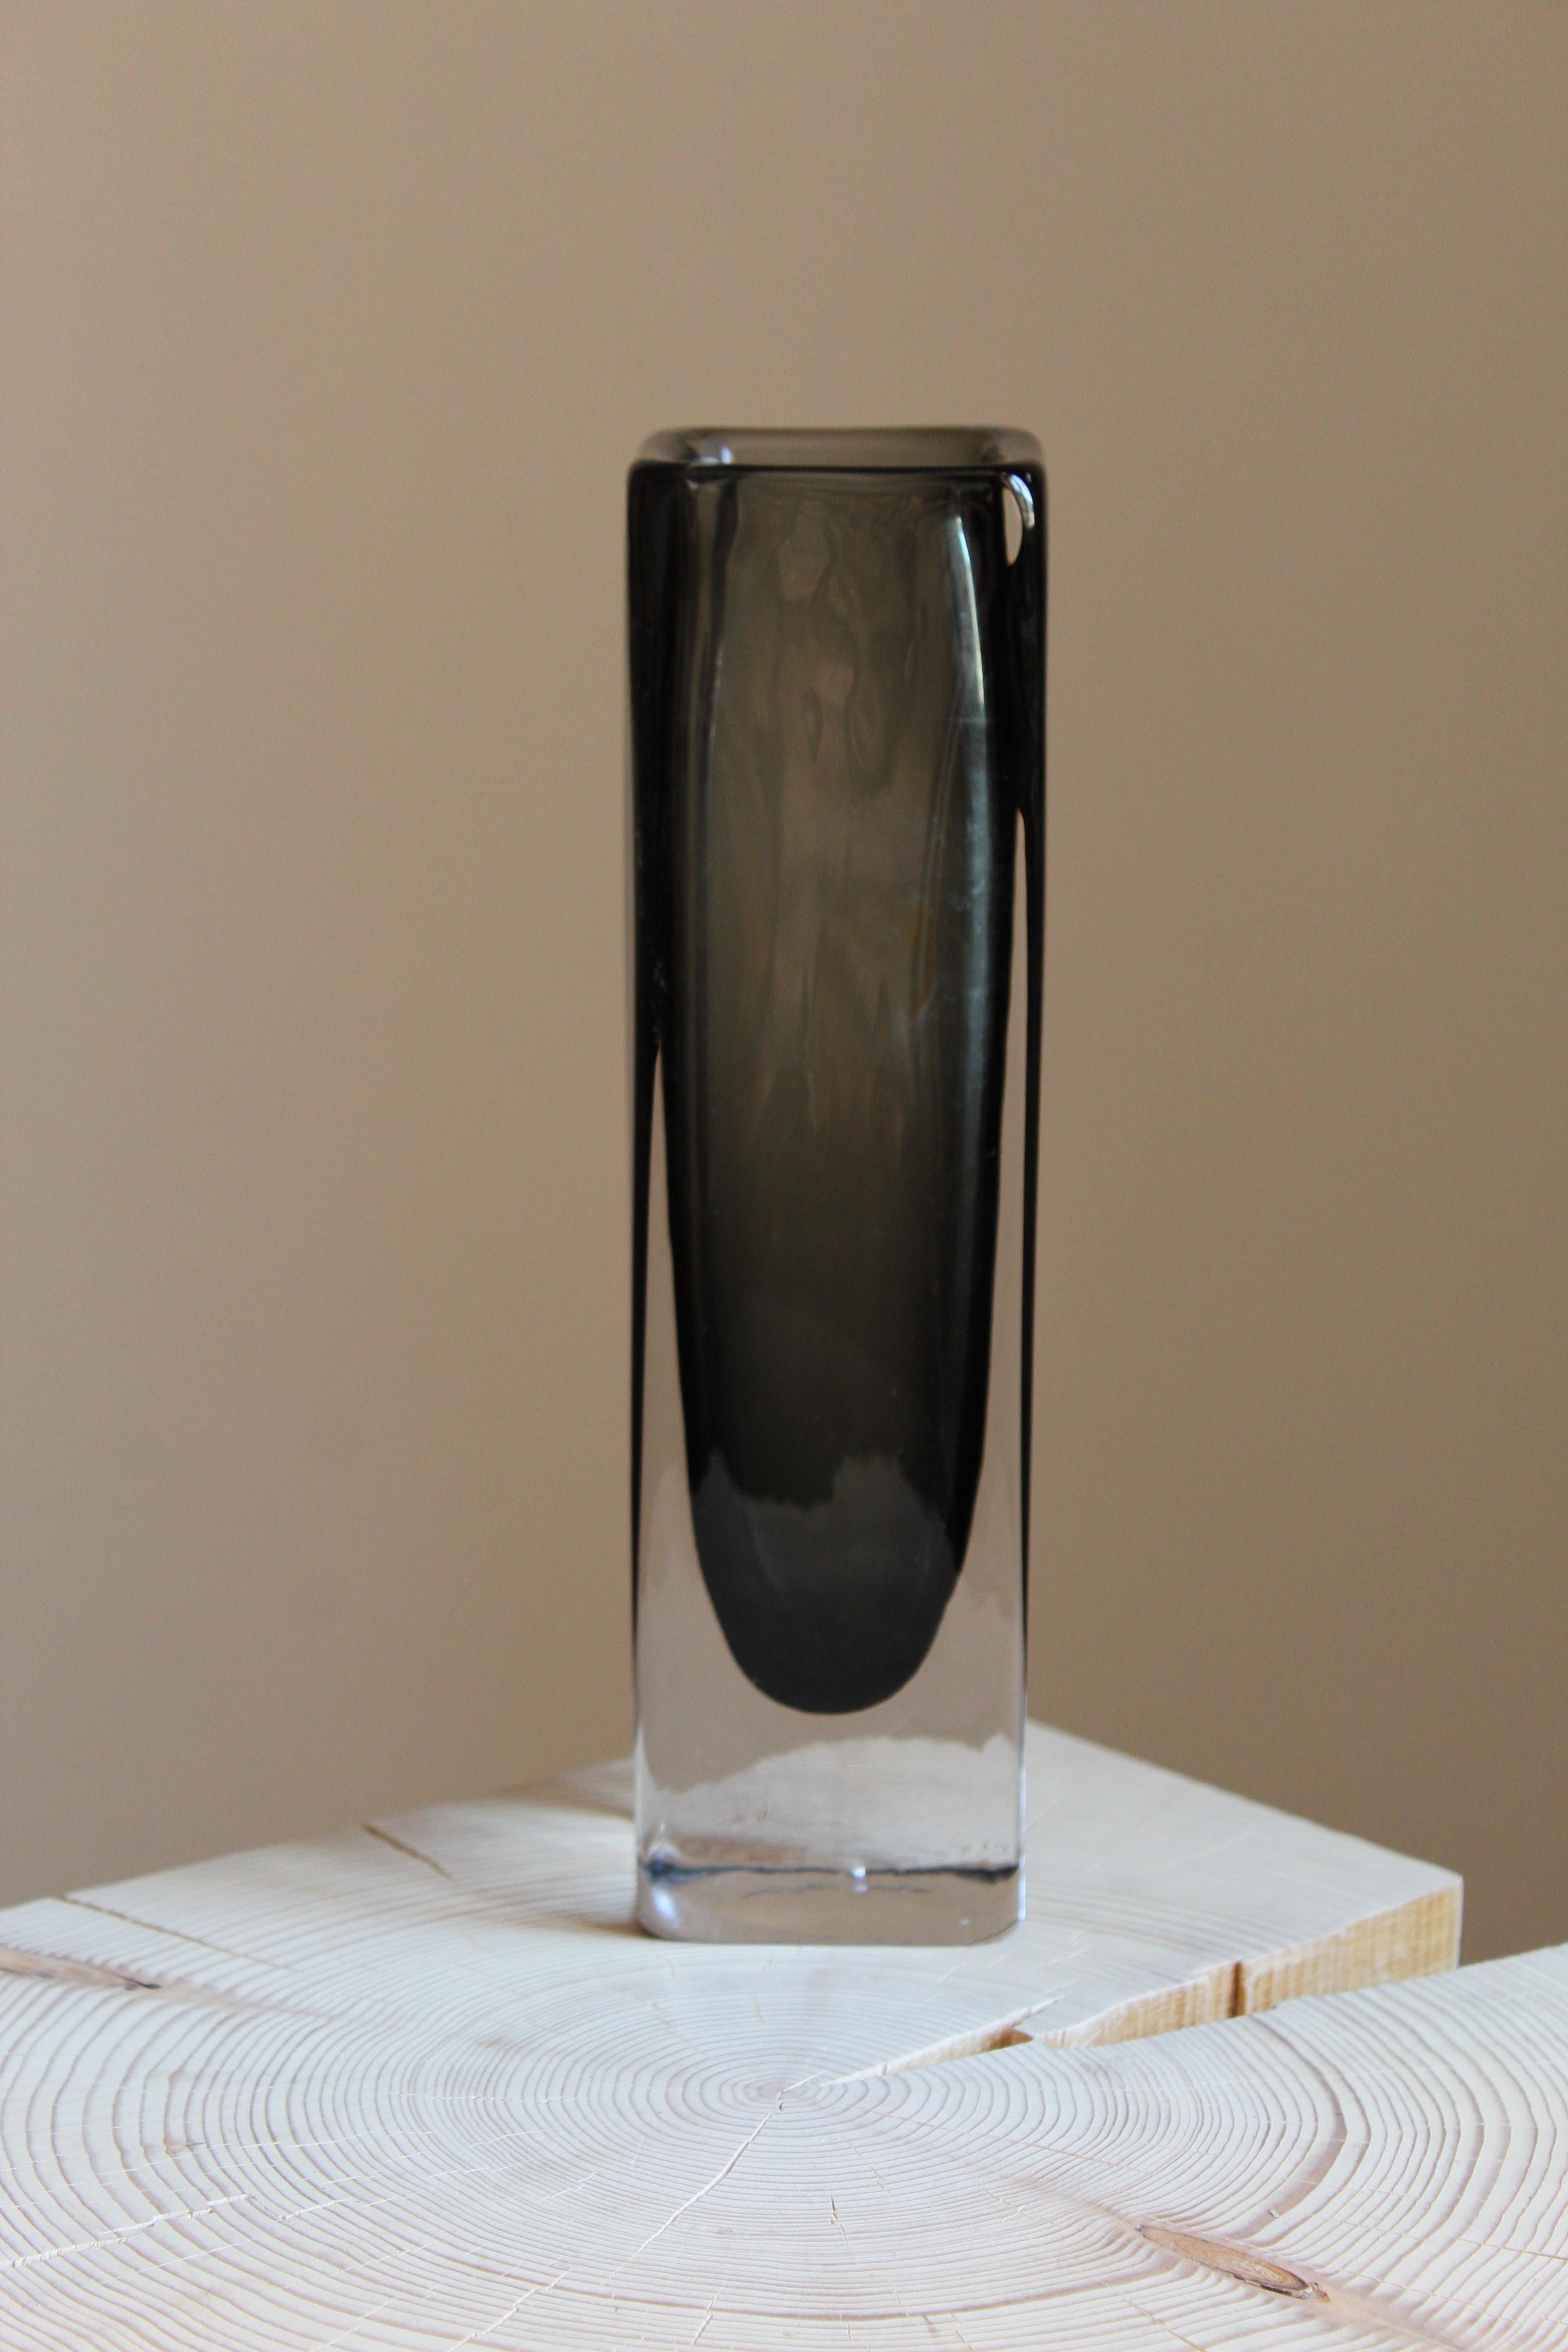 A vase. Blown glass. Designed by Nils Landberg, produced by Orrefors, 1950s. Unsigned.



